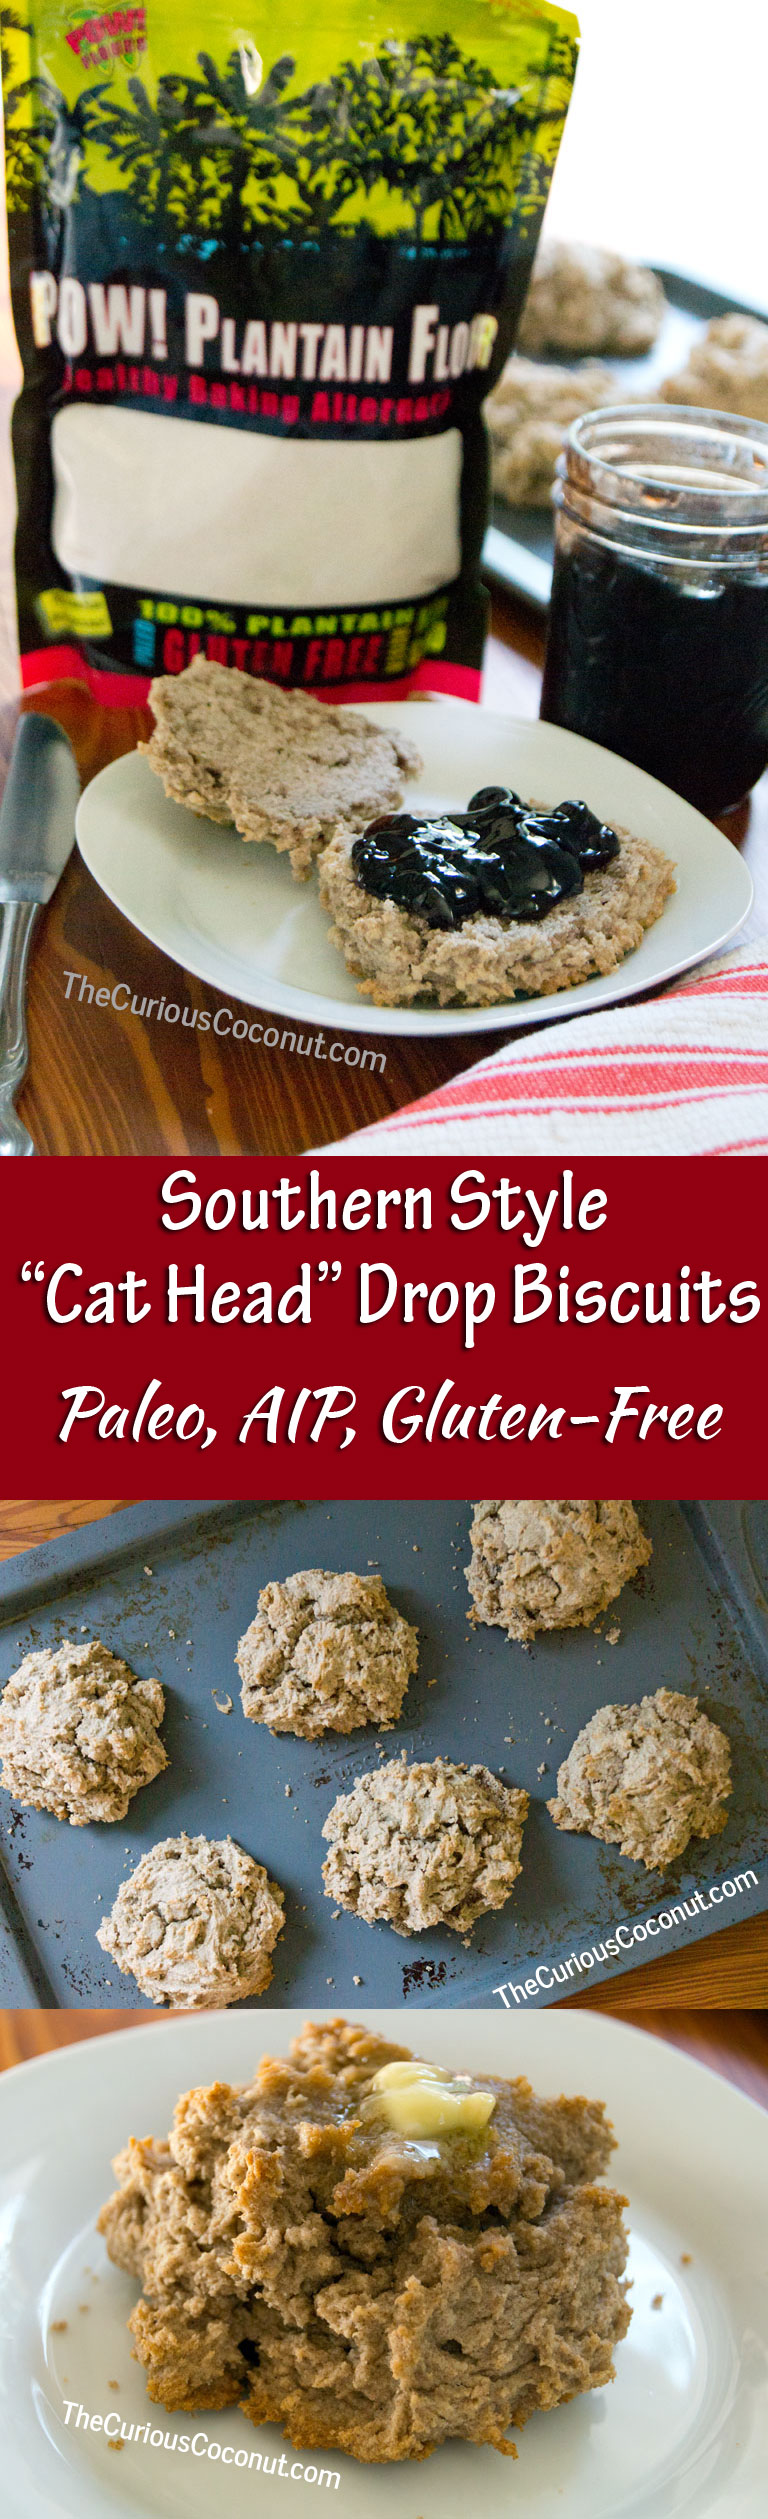 Cat-head biscuits are a Southern traditional drop biscuit. Easy, delicious, now gluten-free, Paleo, AIP with #plantainflour // TheCuriousCoconut.com